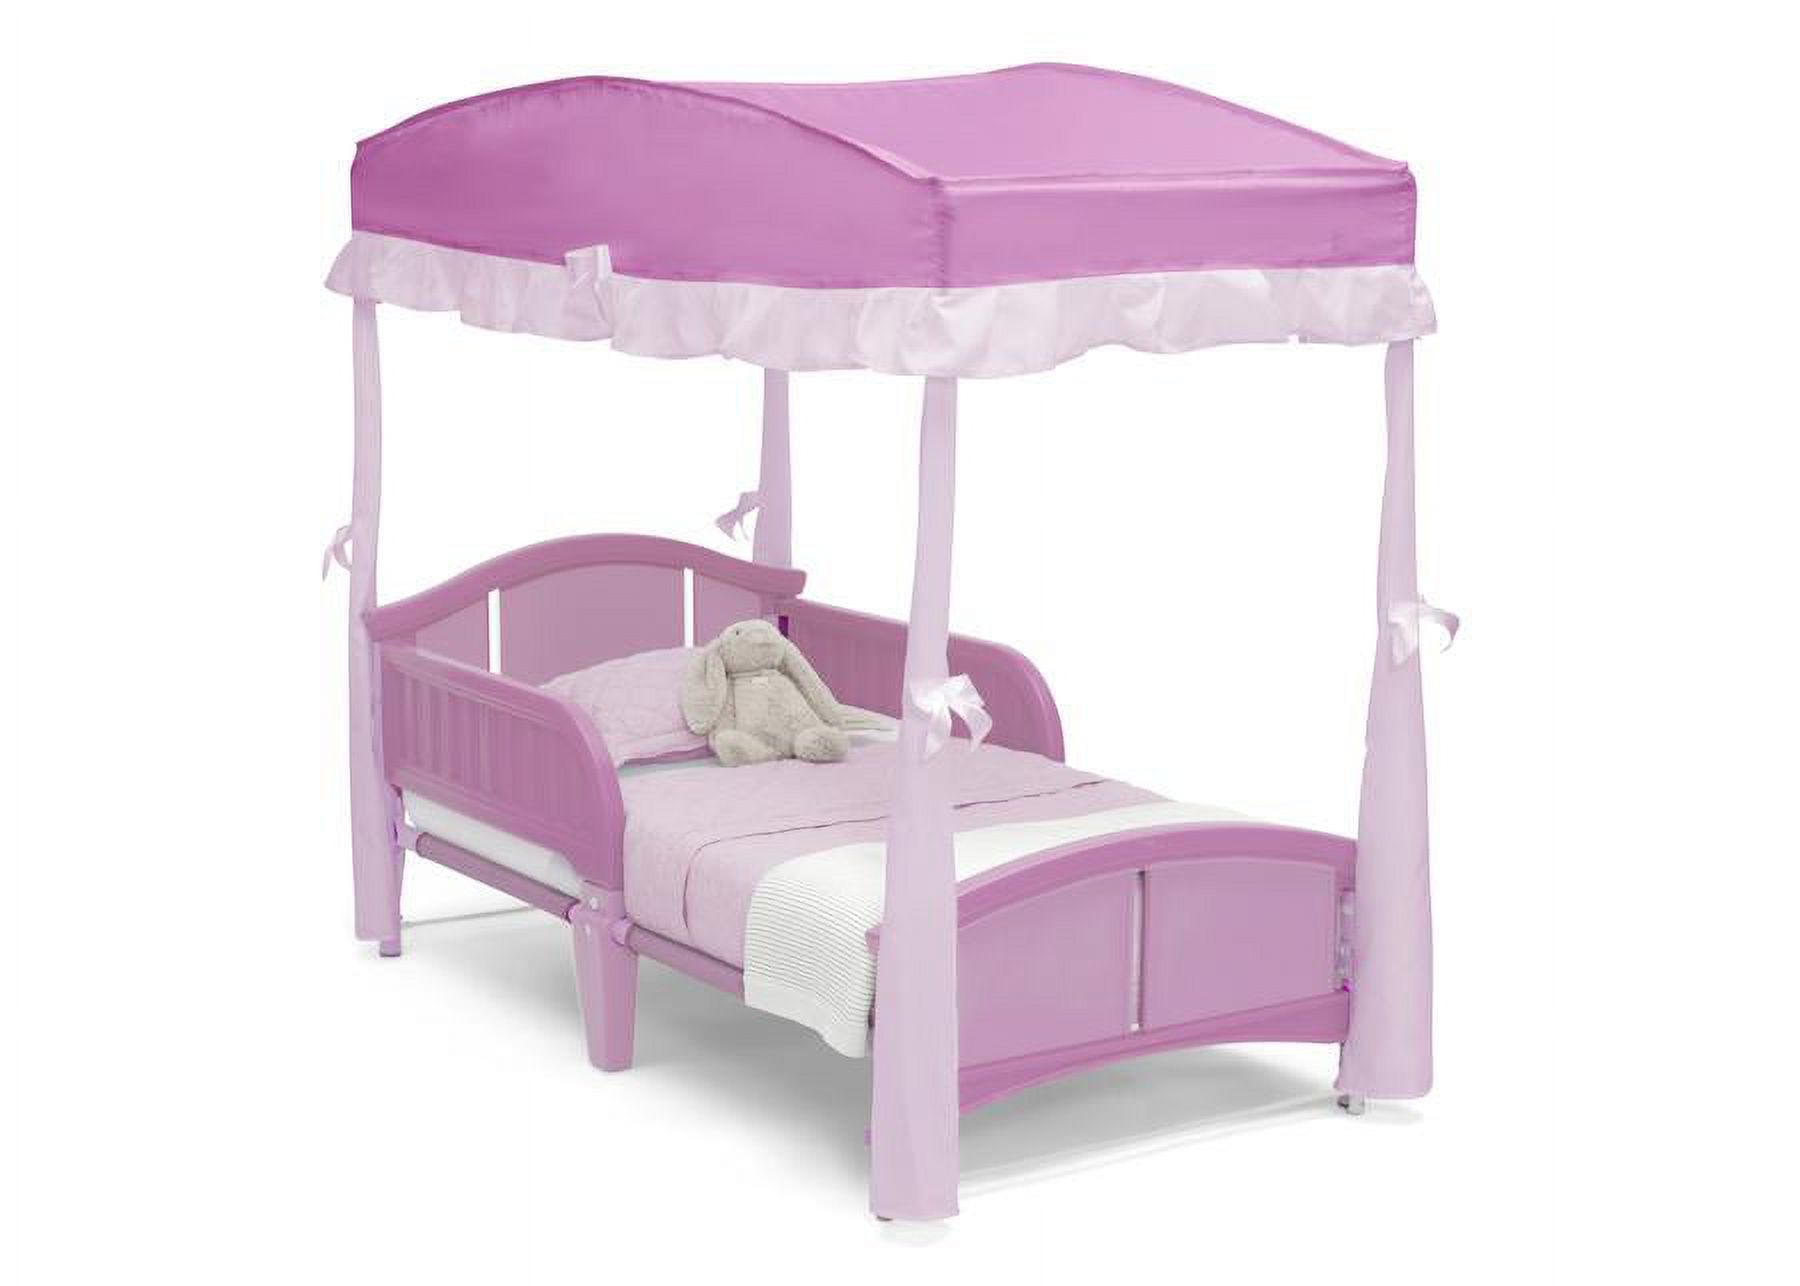 Delta Toddler Bed Canopy, Pink - image 3 of 7